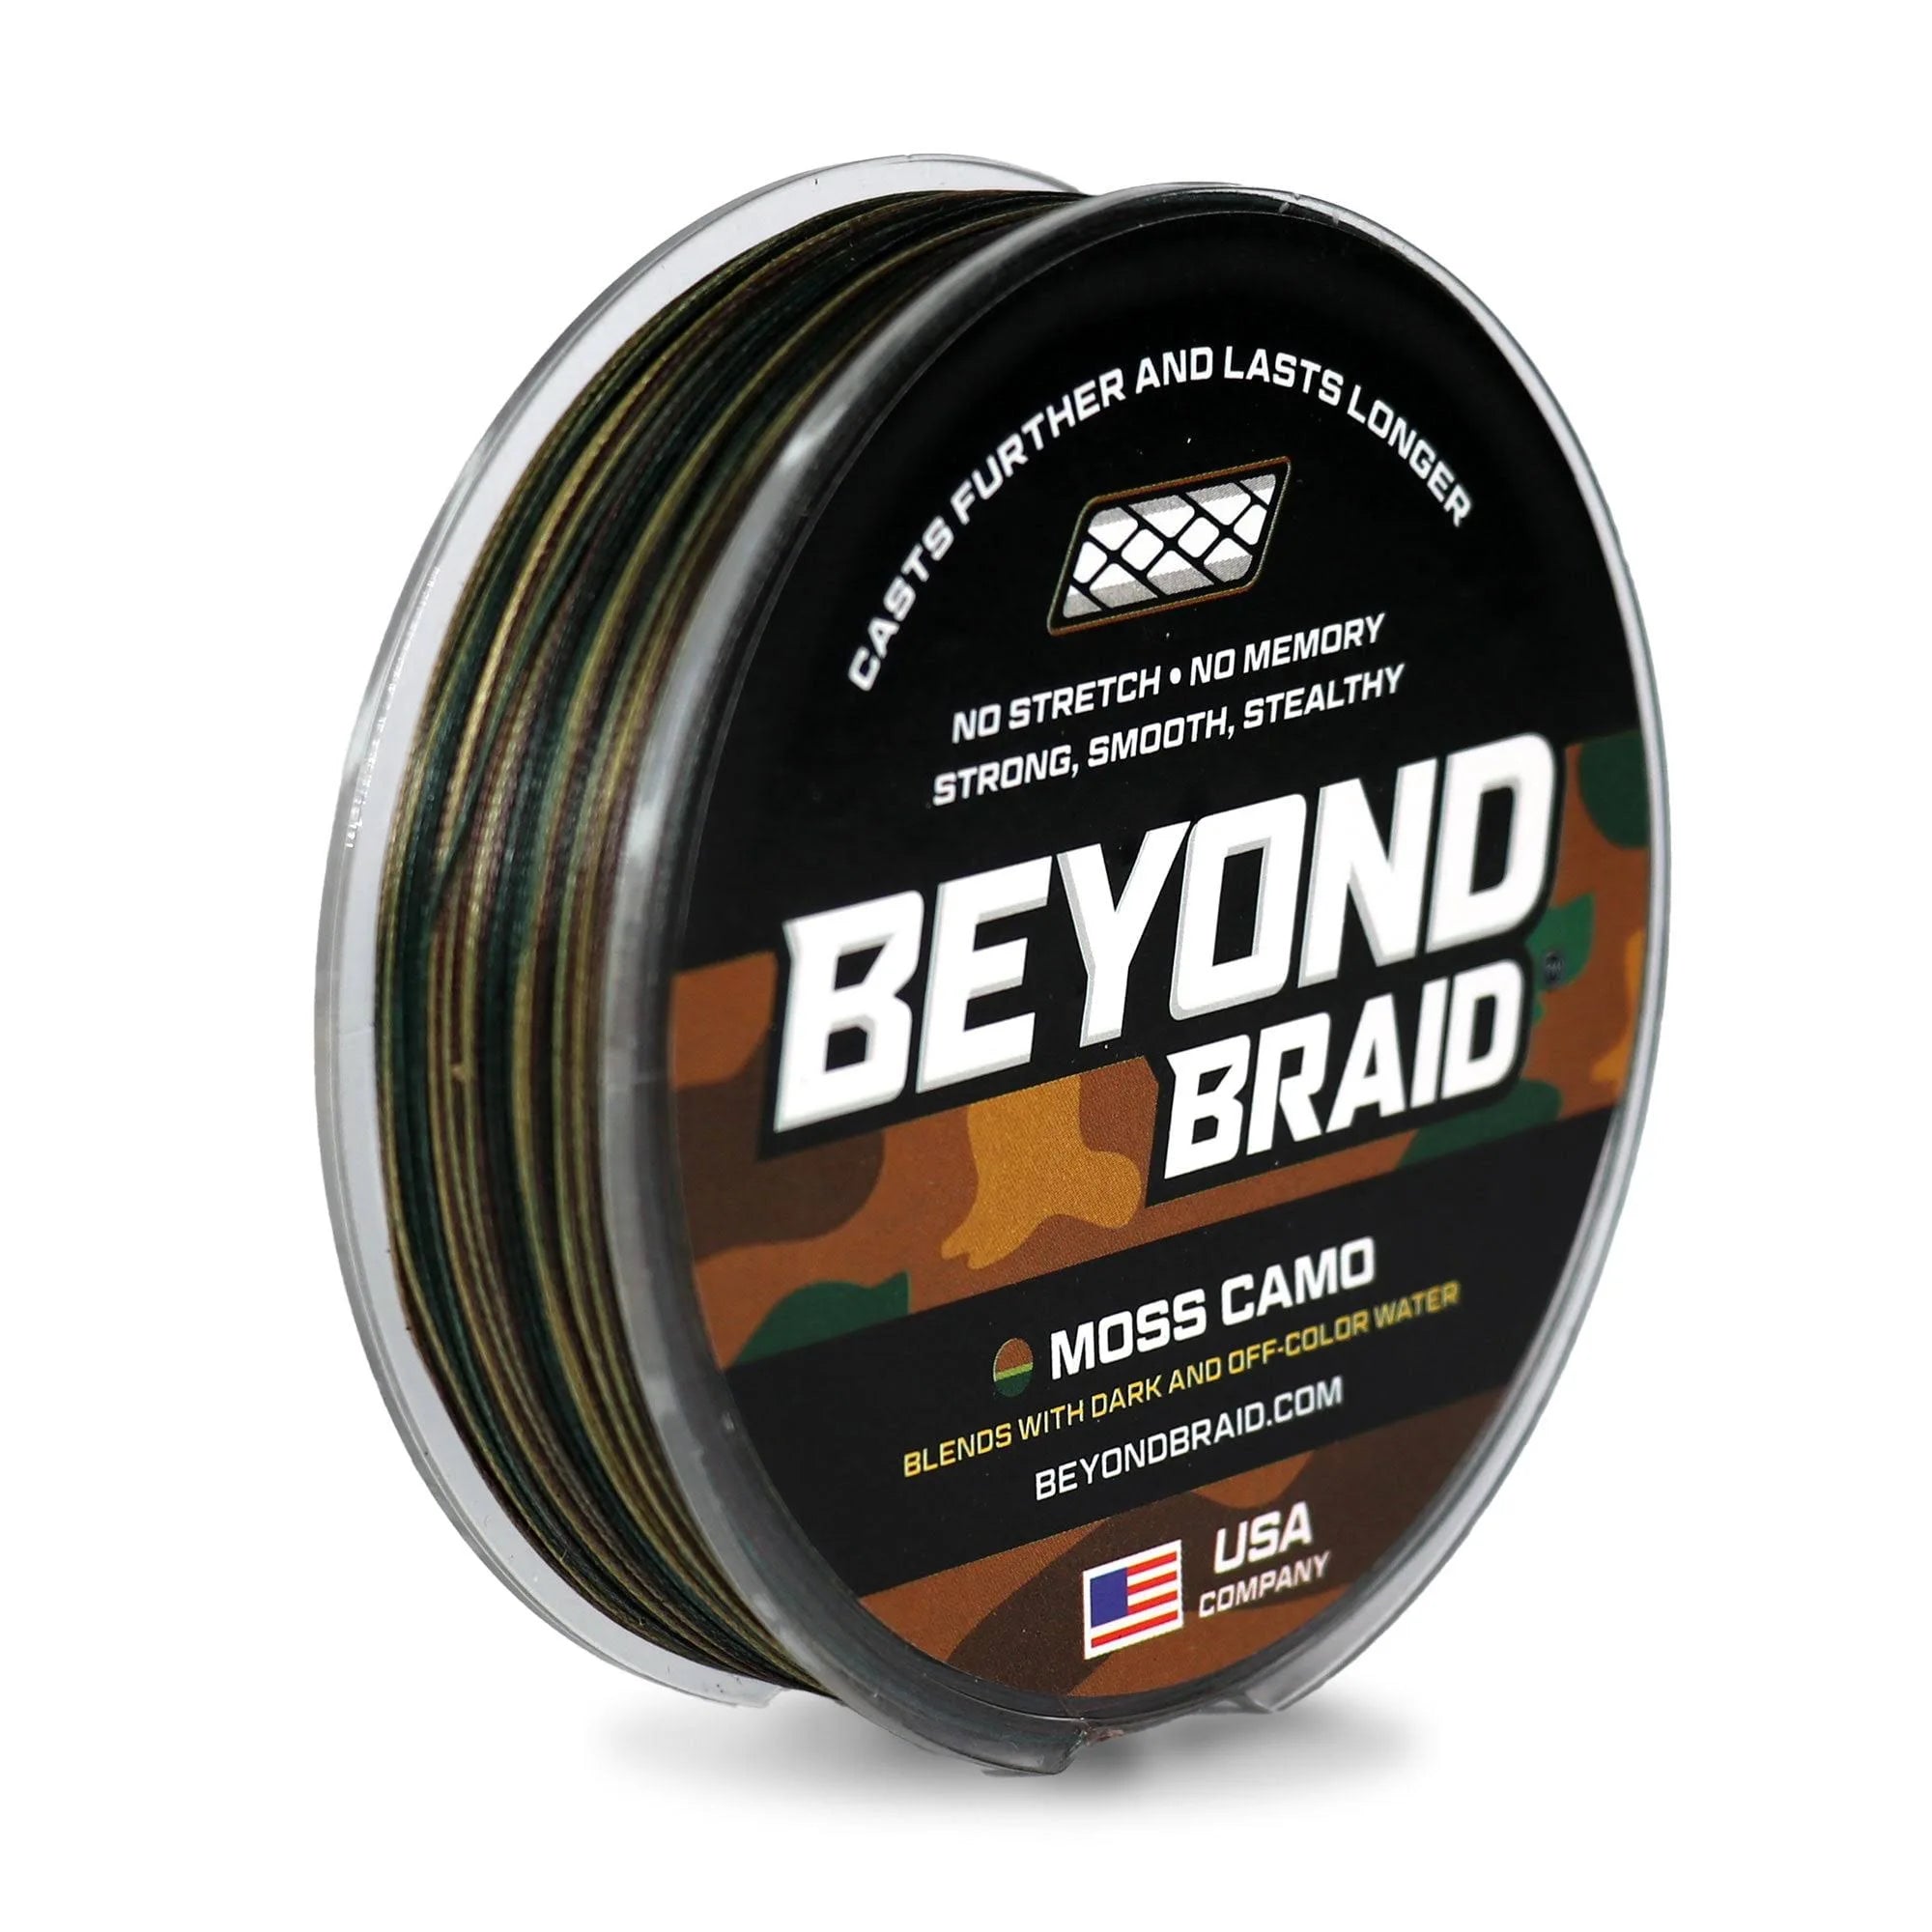 Beyond Braid Braided Fishing Line - Abrasion Resistant - No Stretch -  Strong